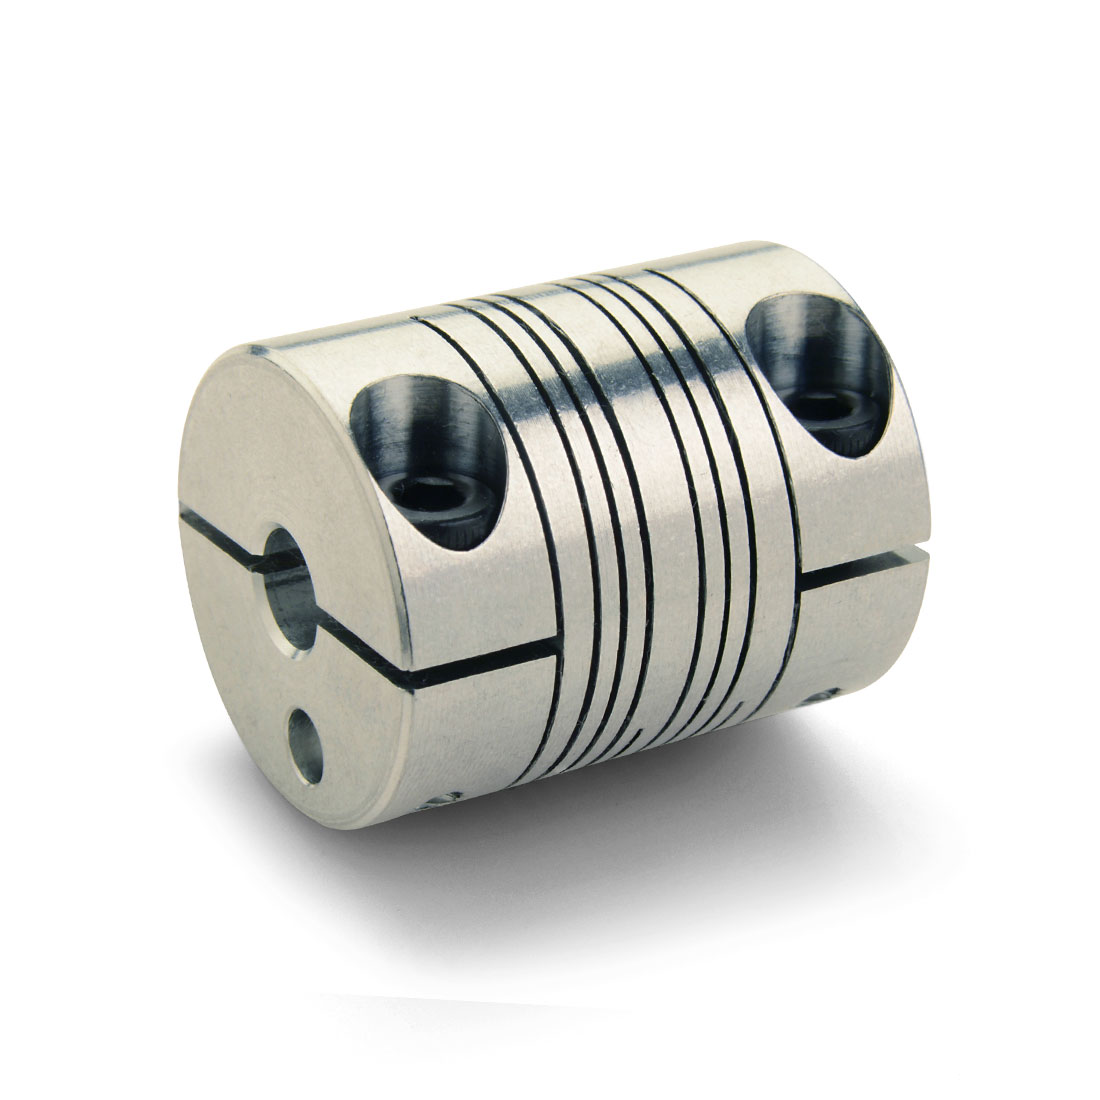 0.875 x 0.875 Bores Clamp Style 2.000 OD Ruland BC32-14-14-A 2024 or 7075 Aluminum Hubs Bellows Coupling